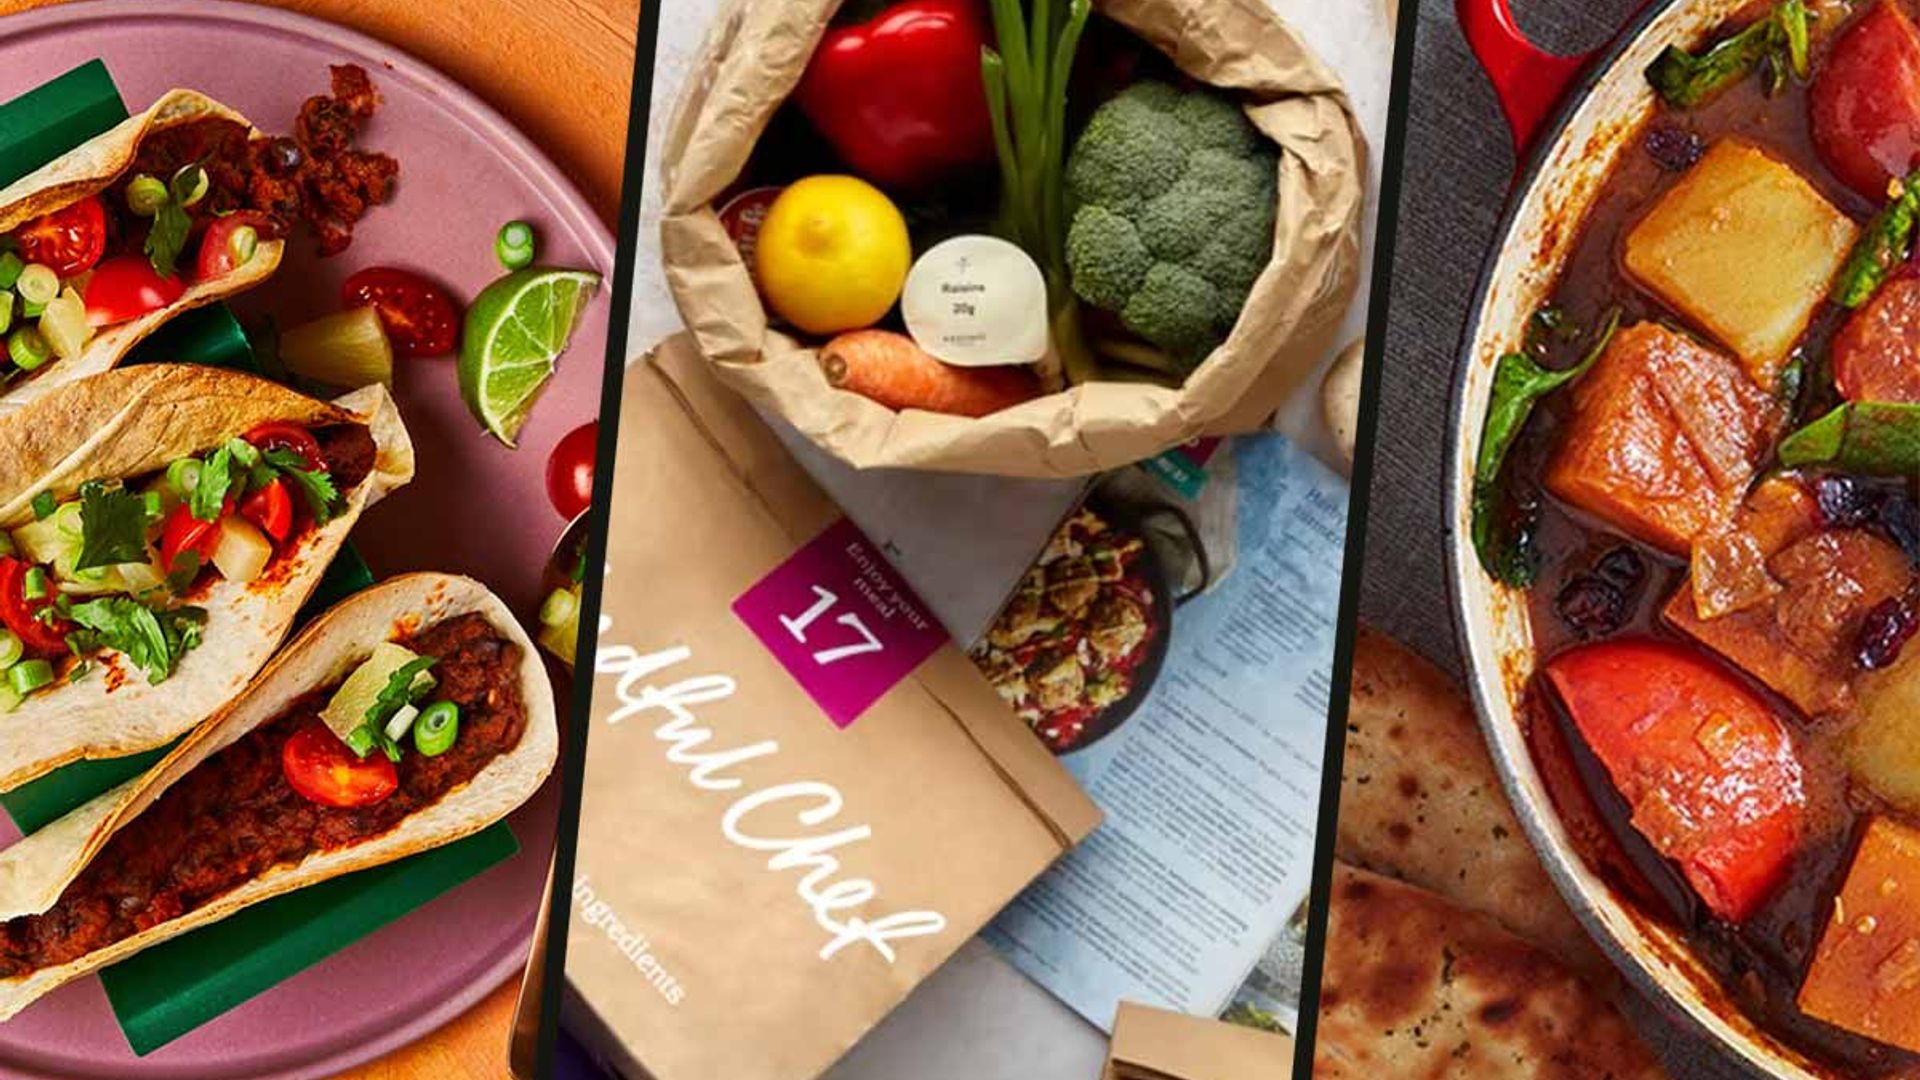 Veganuary SOS: 5 best plant-based vegan subscription boxes this January 2022